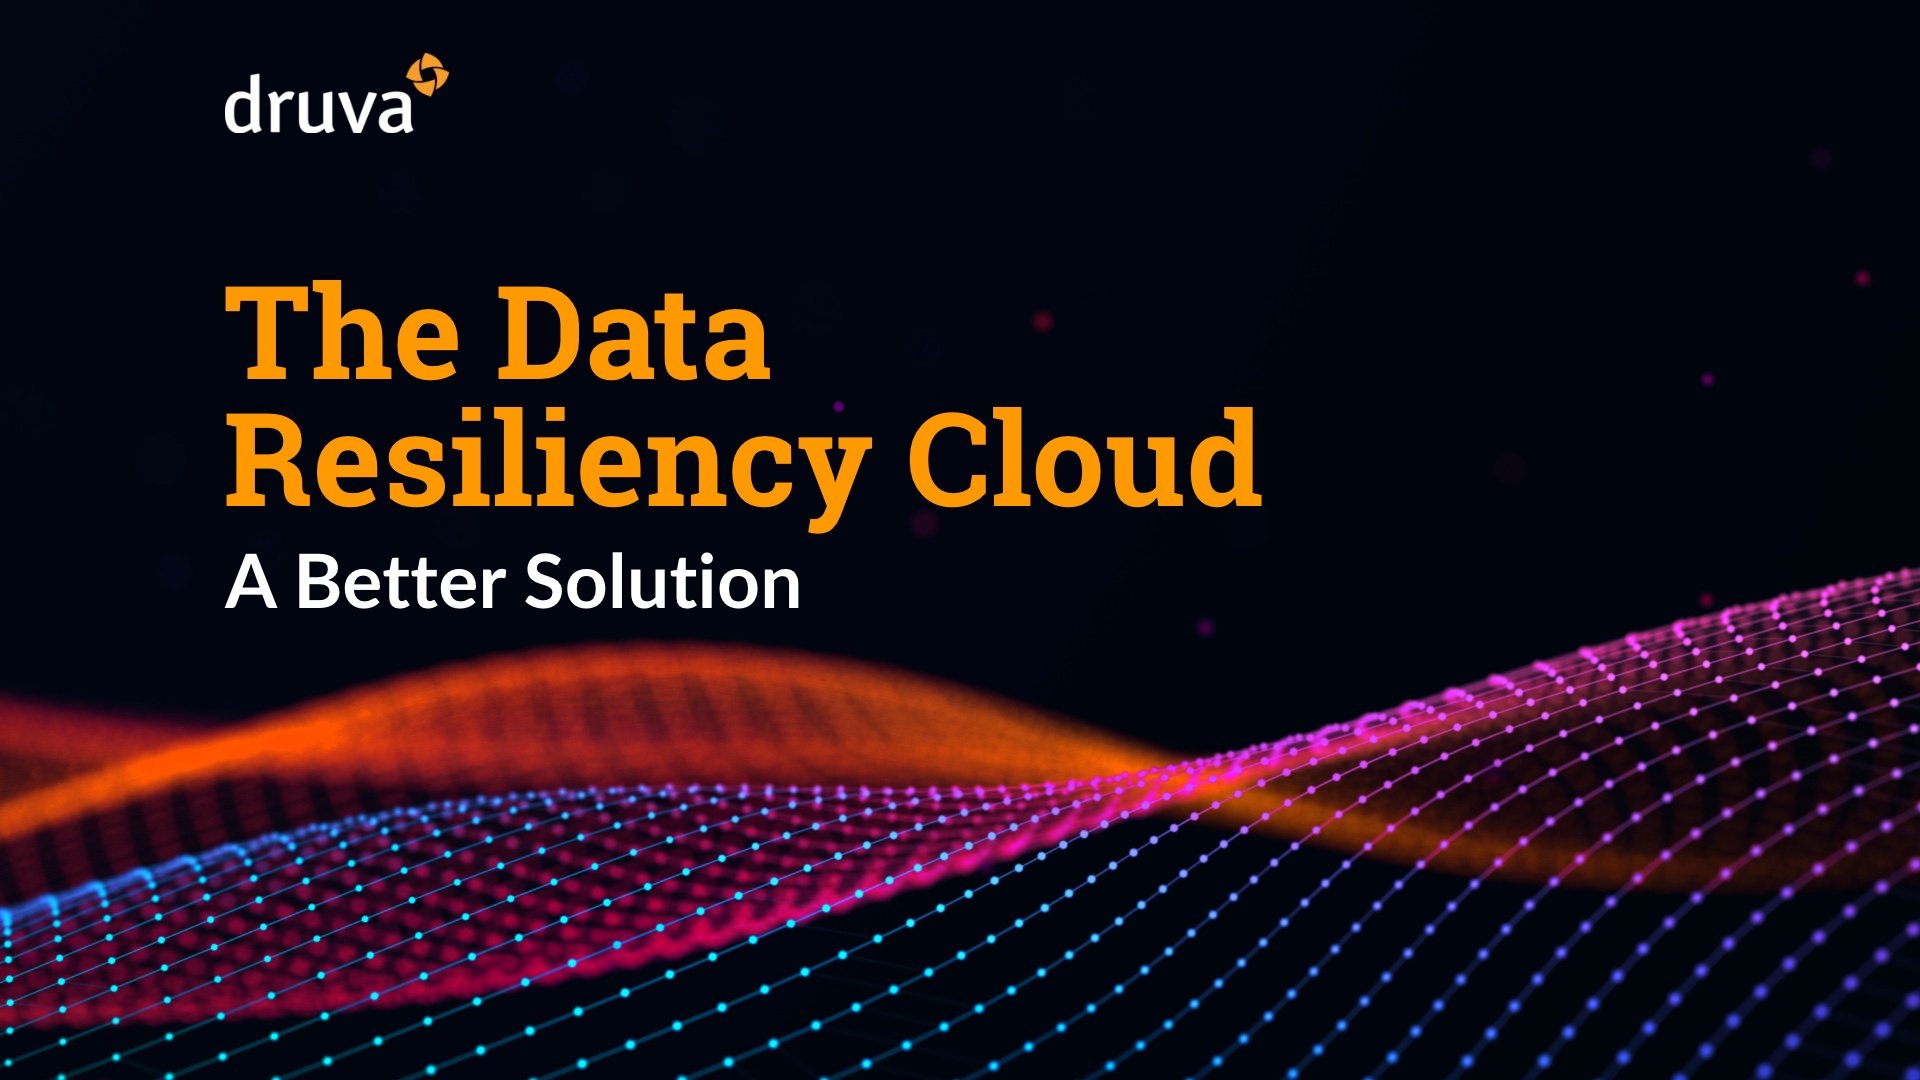 A Better Solution: The Data Resiliency Cloud